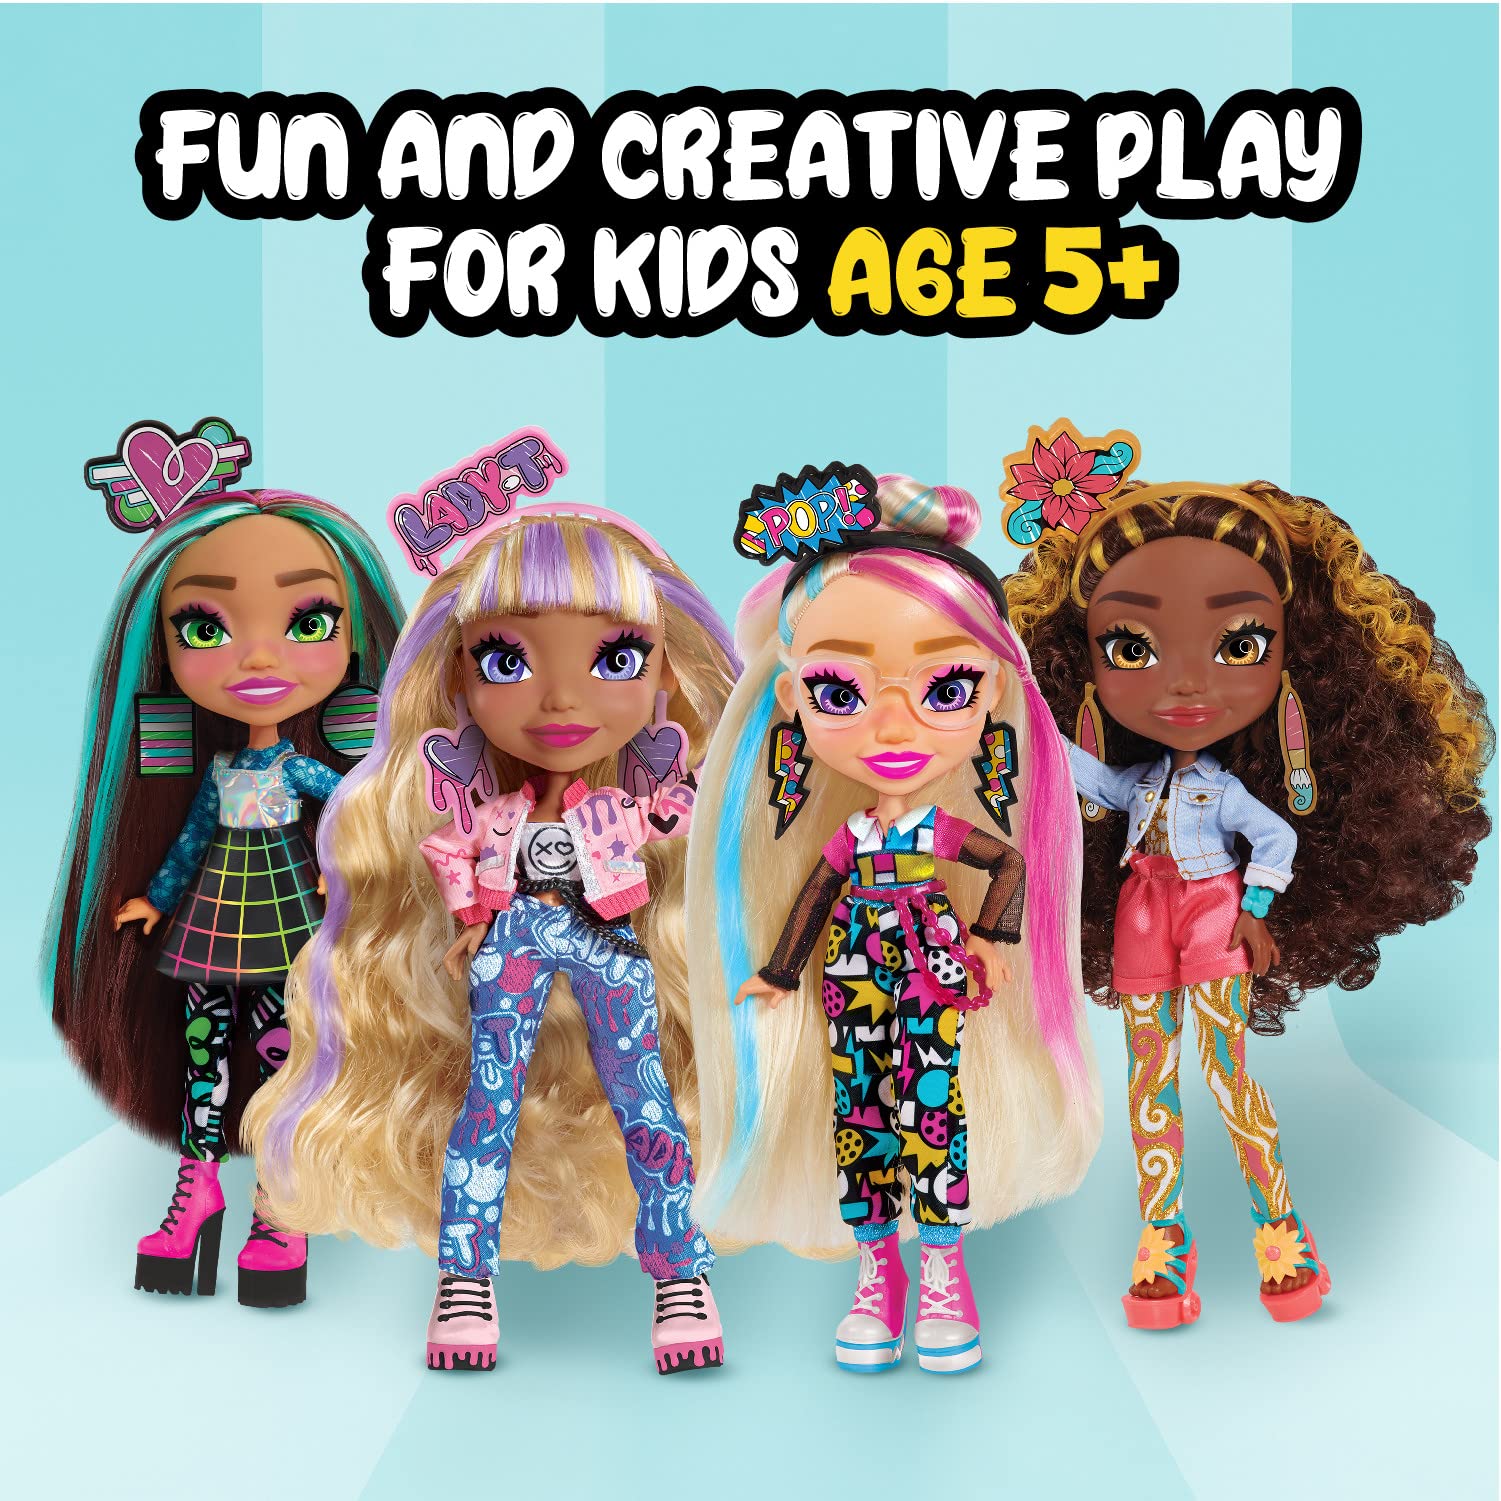 ART SQUAD Nene 10-inch Doll & Accessories with DIY Craft Etching Project, Kids Toys for Ages 3 Up, Gifts and Presents by Just Play